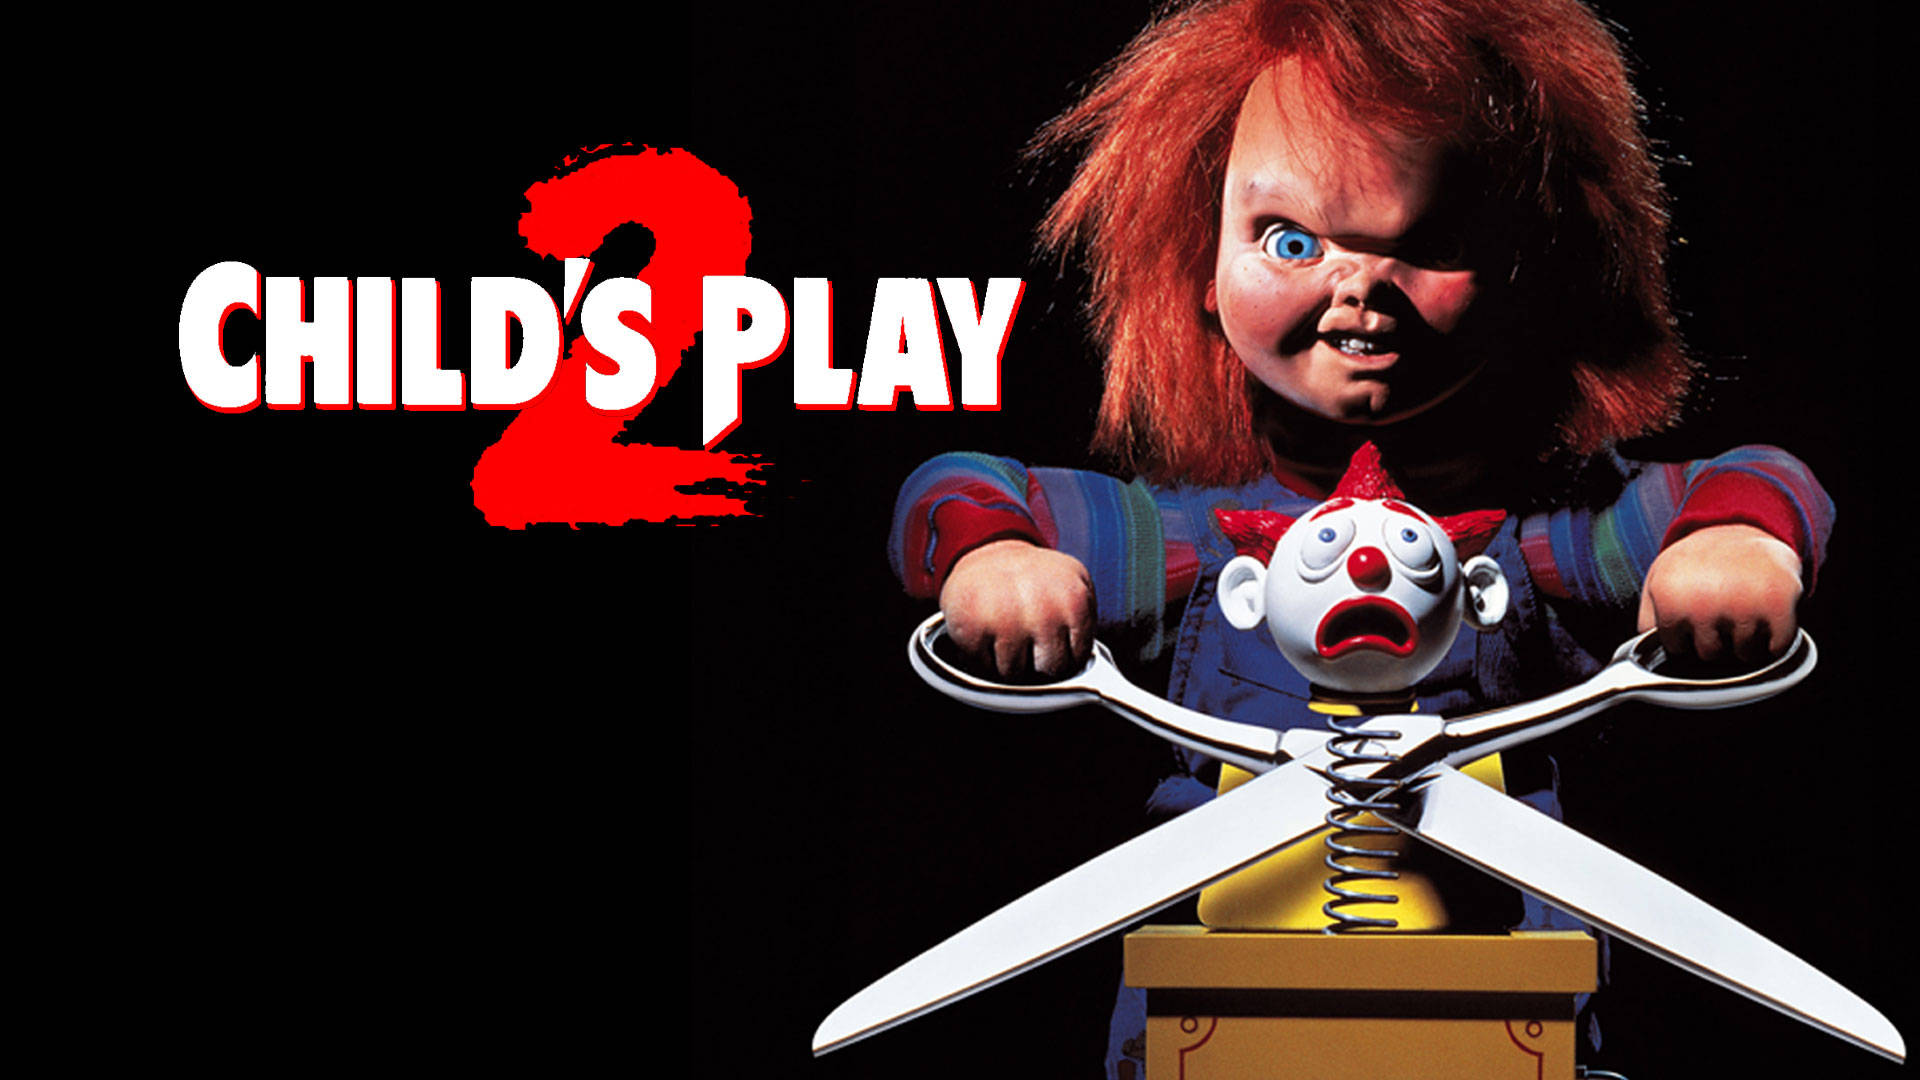 Free Child's Play Wallpaper Downloads, [100+] Child's Play Wallpapers for  FREE 